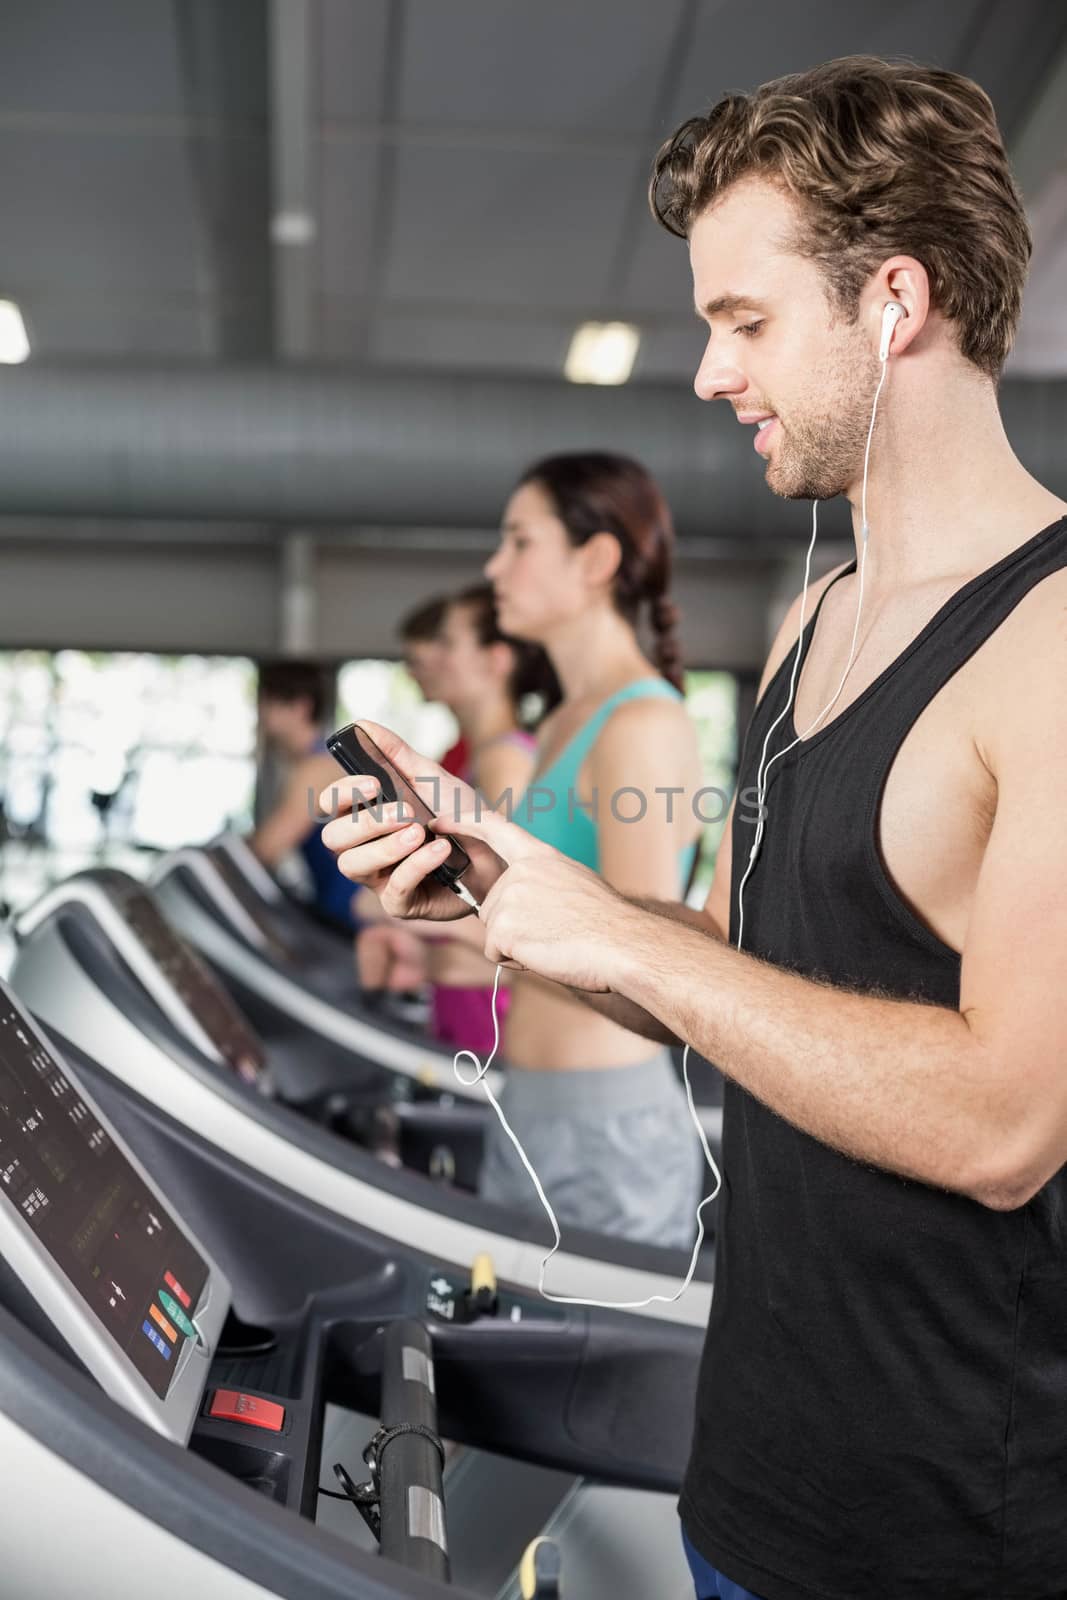 Smiling muscular man on treadmill listening to music at gym 